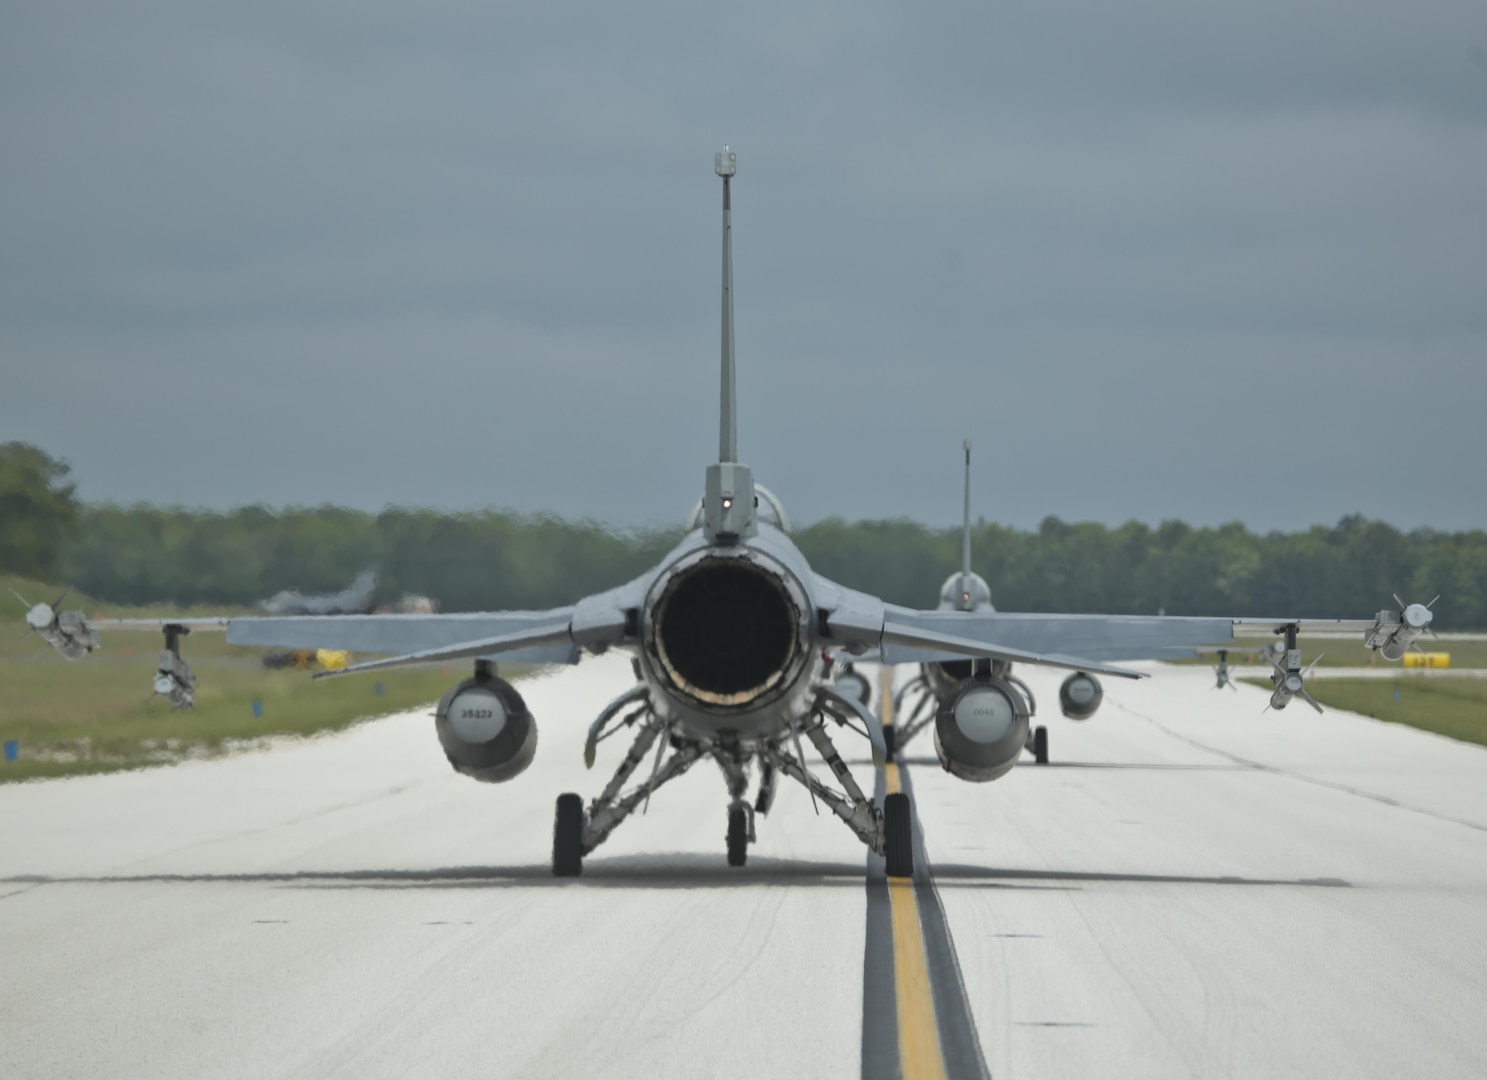 New Jersey Air National Guard F-16 Fighting Falcons from the 177th Fighter Wing taxi for take off during a three-day Aeropsace Control Alert CrossTell live-fly training exercise at Atlantic City Air National Guard Base, N.J., May 23, 2017. Representatives from the Air National Guard fighter wings, Civil Air Patrol, and U.S. Coast Guard rotary-wing air intercept units will conduct daily sorties from May 23-25 to hone their skills with tactical-level air-intercept procedures. (U.S. Air National Guard photo by Master Sgt. Matt Hecht/Released)